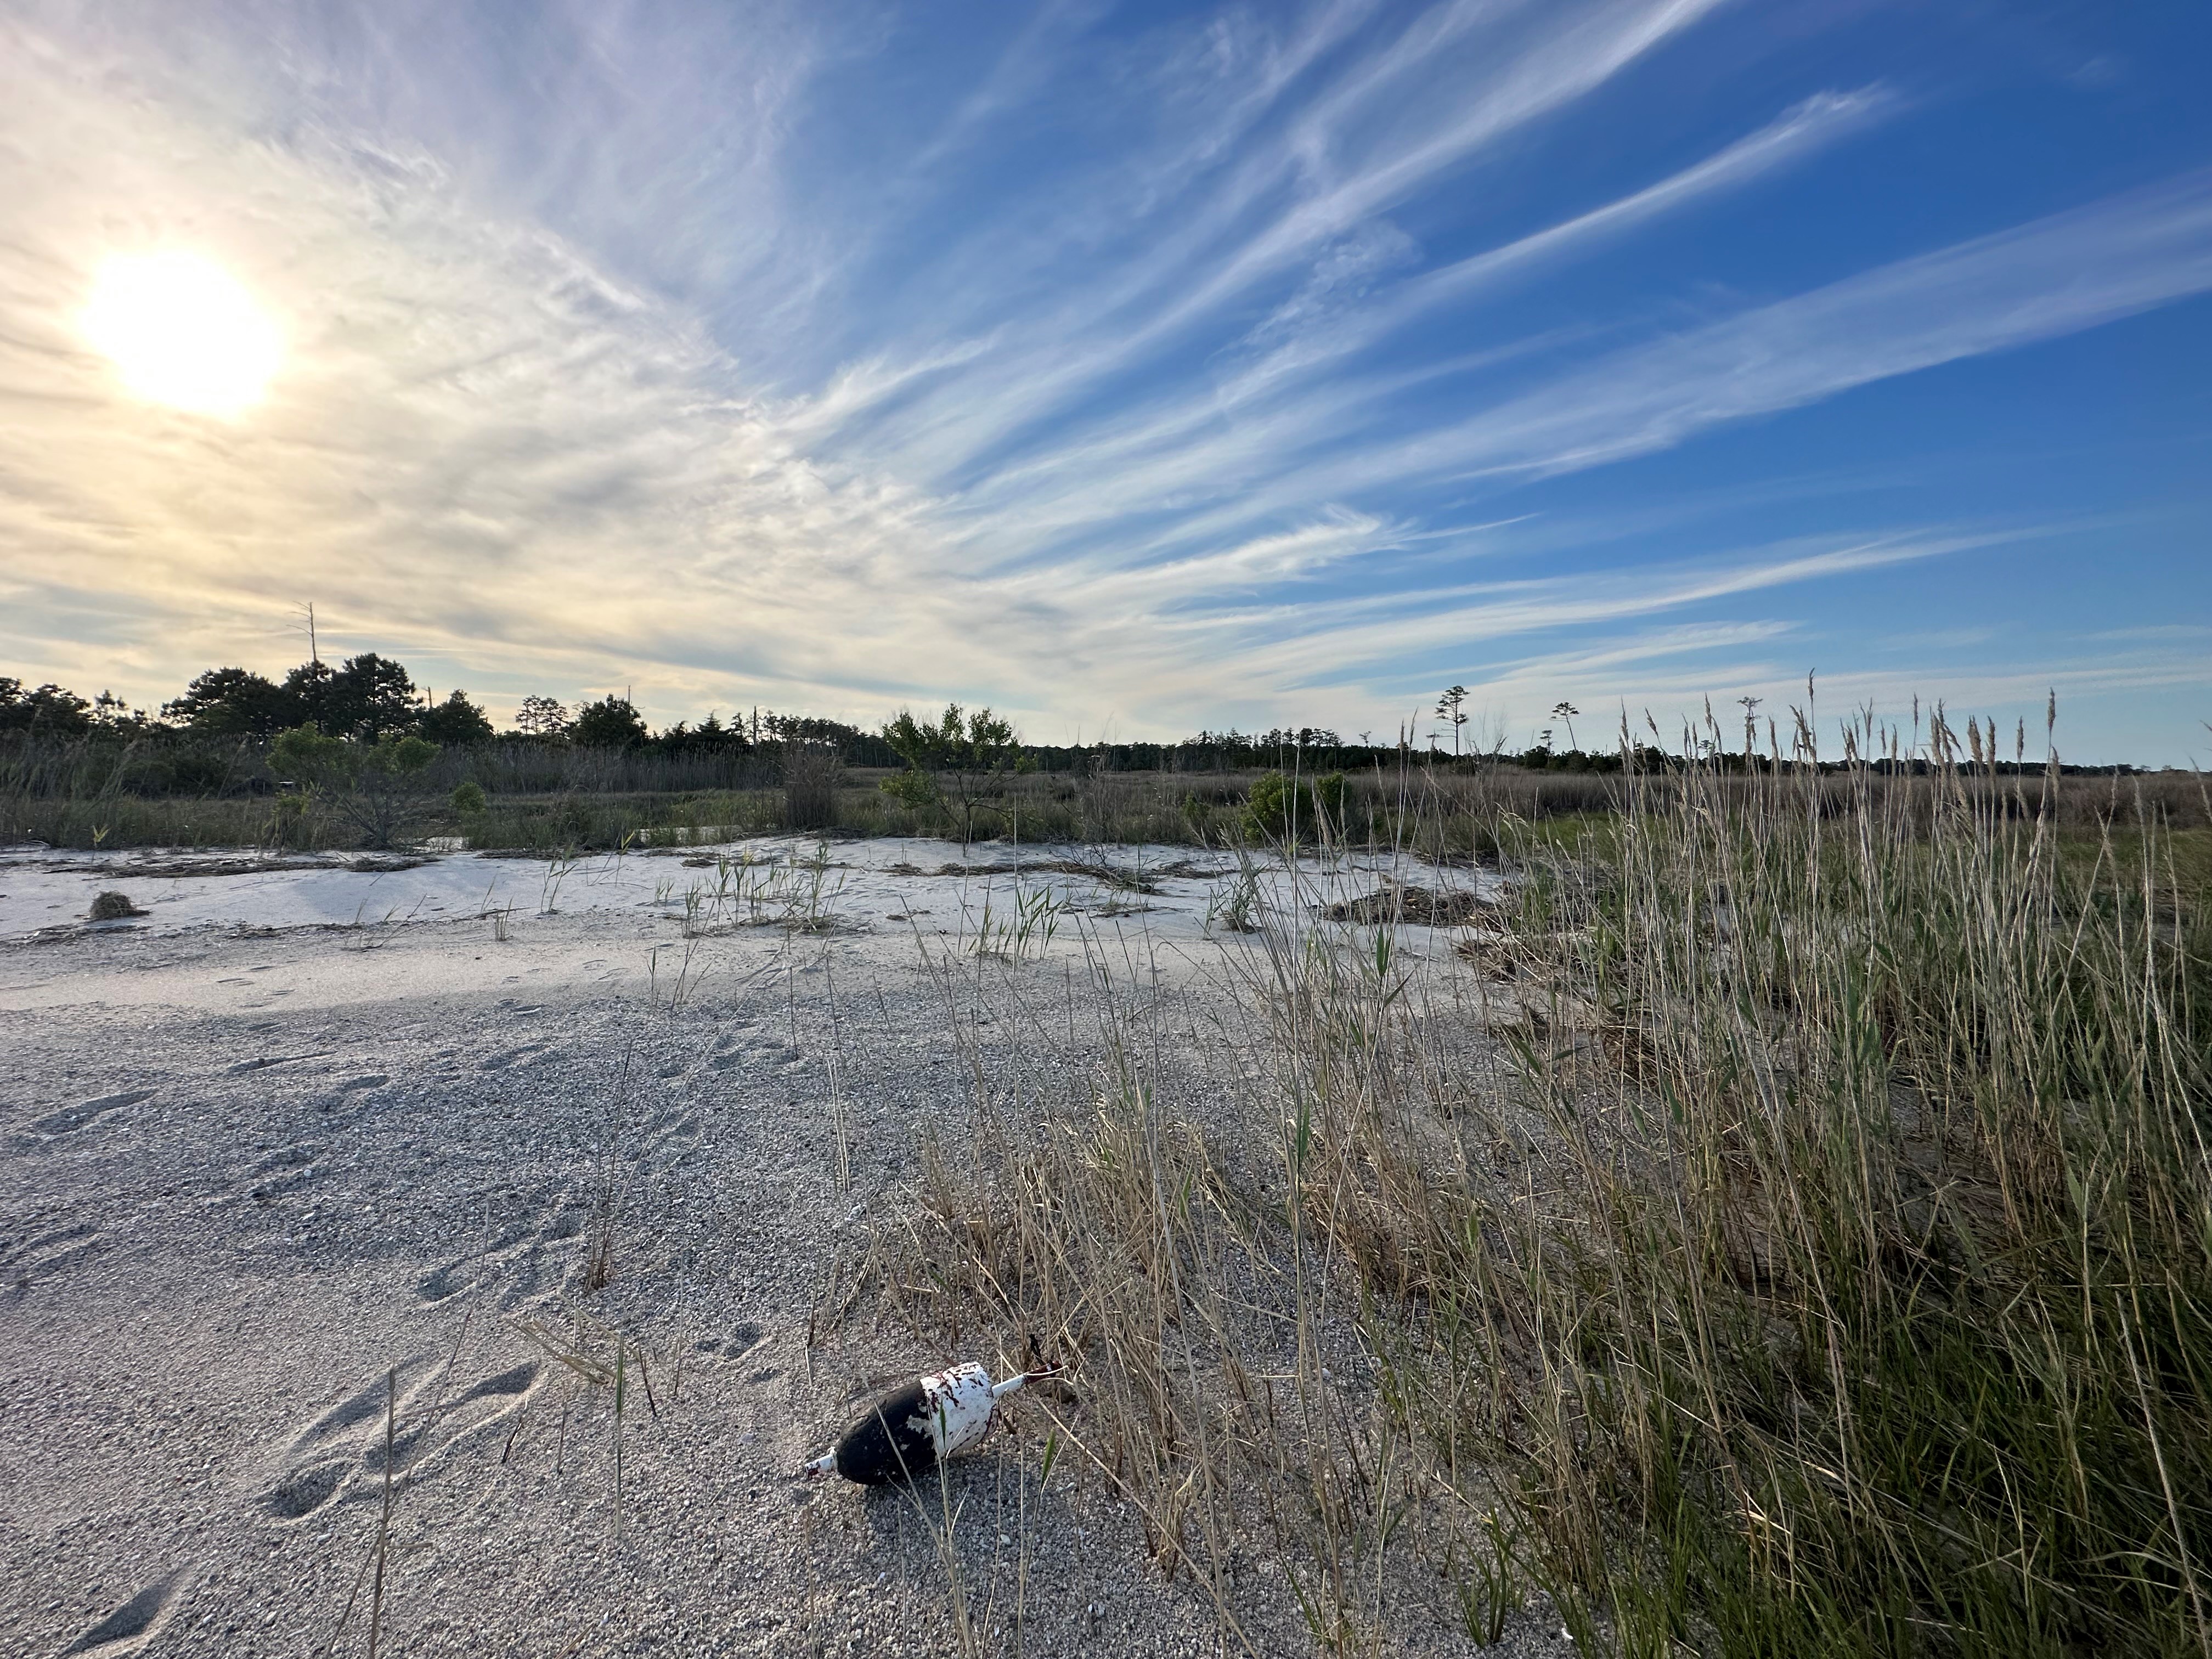 A wide expanse of sand stretches towards a horizon lined by trees. Tall grasses grow along the edge of the sand next to a small, discarded fishing float. Thin white clouds streak the blue sky.